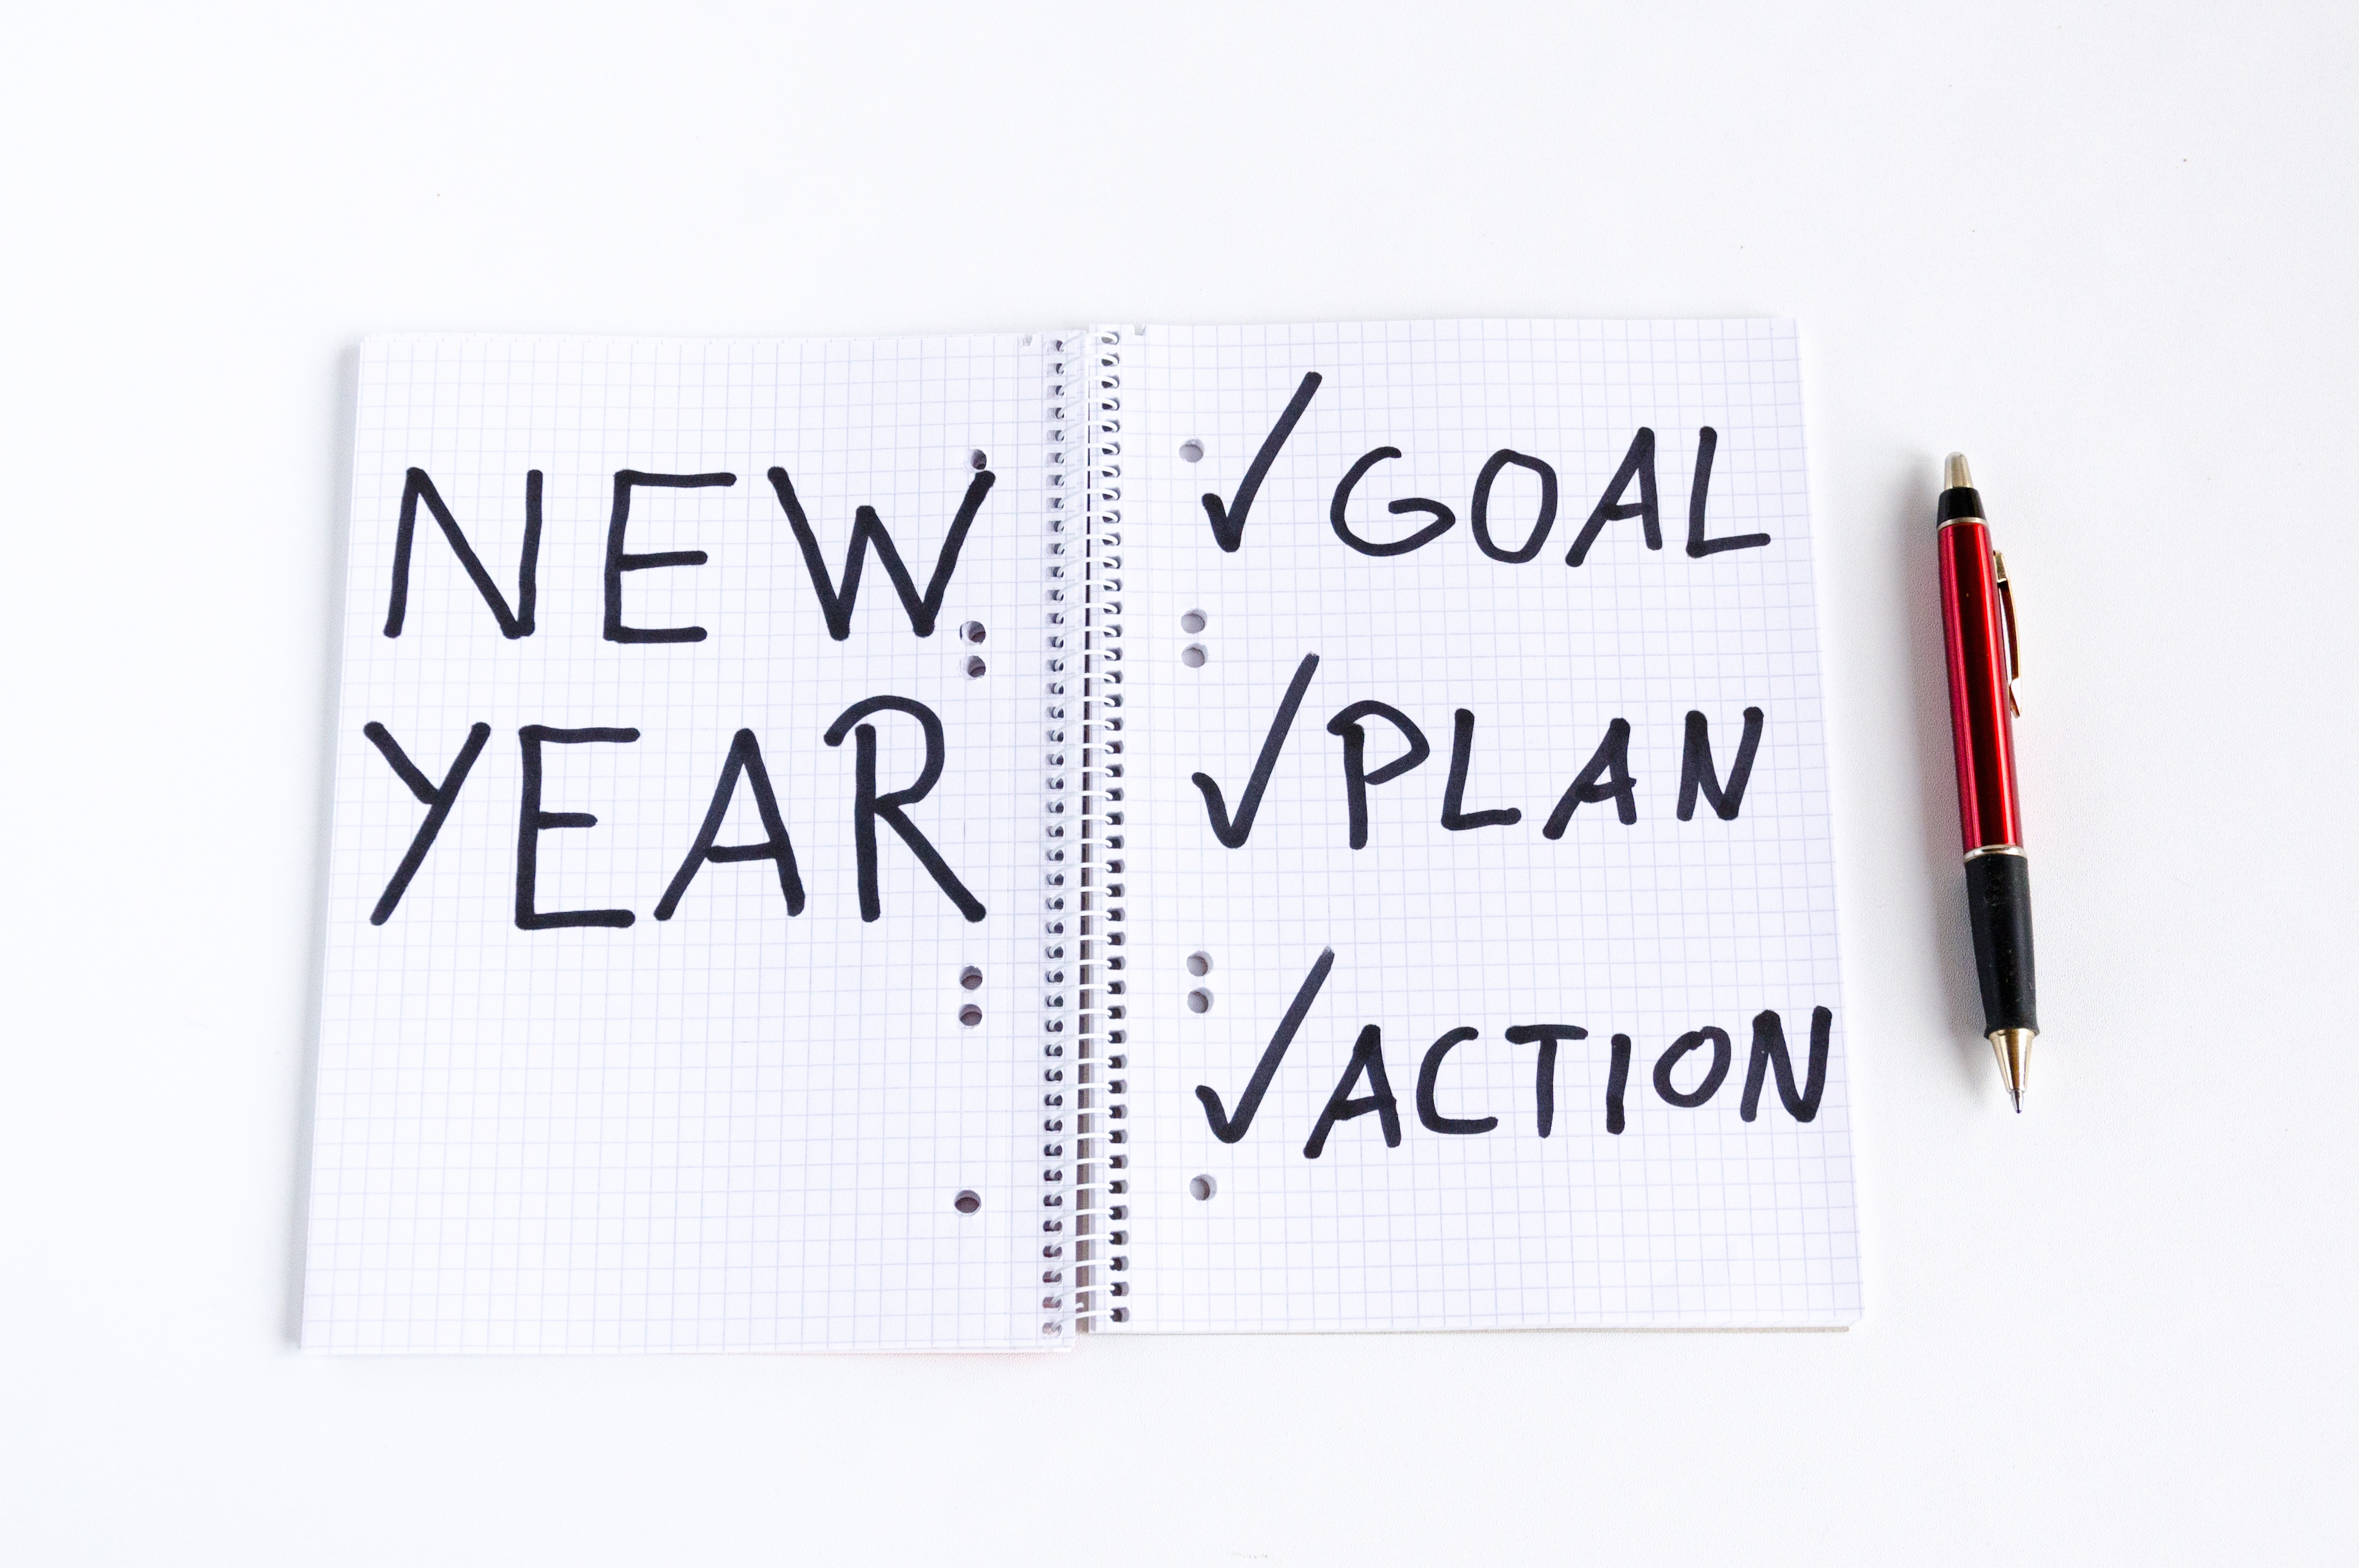 open note book with words 'New Year' and a tick list of 'goal; plan; action'